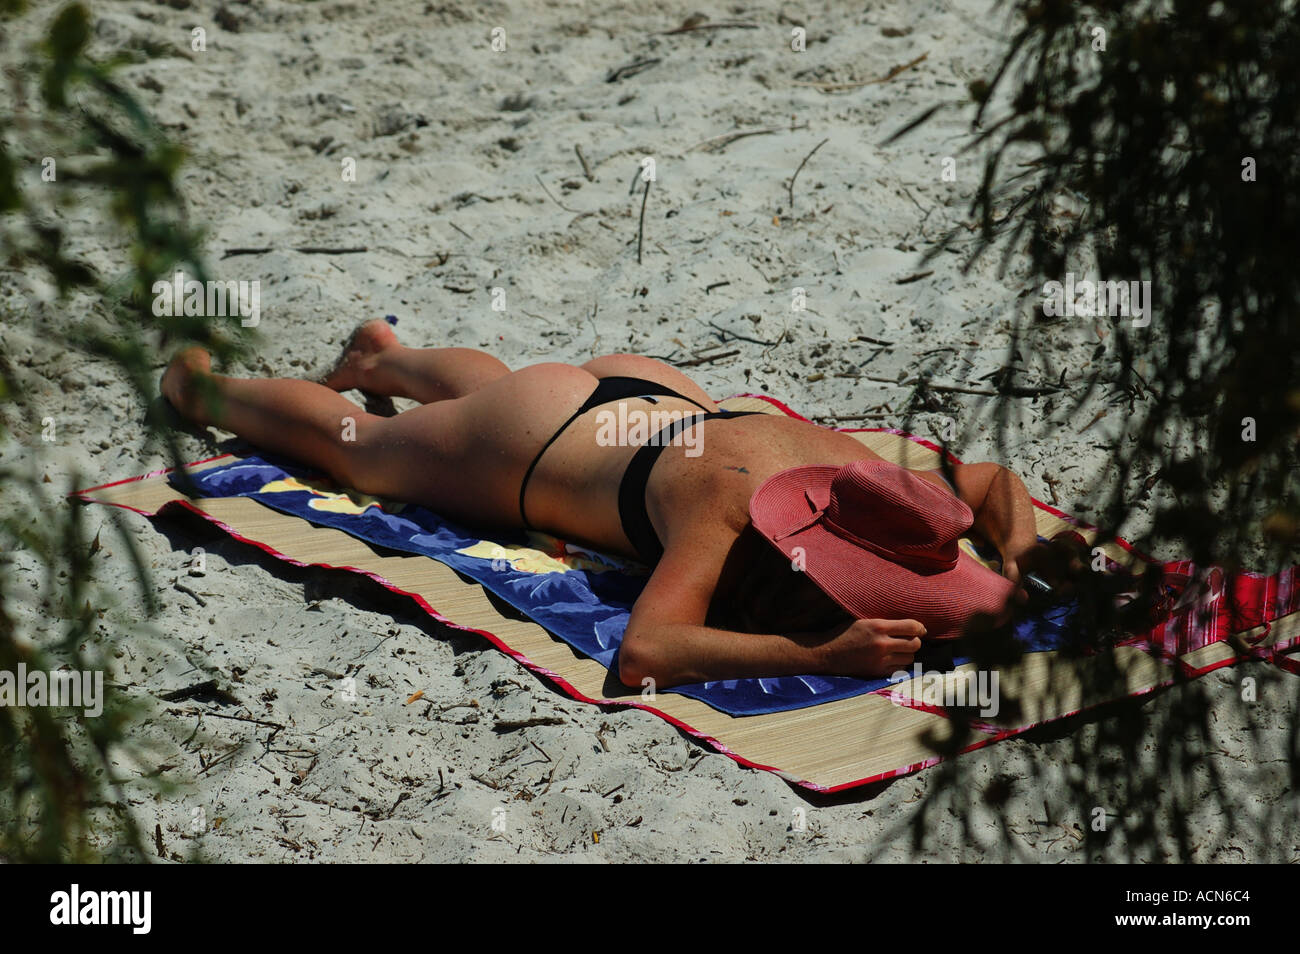 Young woman sunbakes alone on secluded beach dsc 5994 Stock Photo